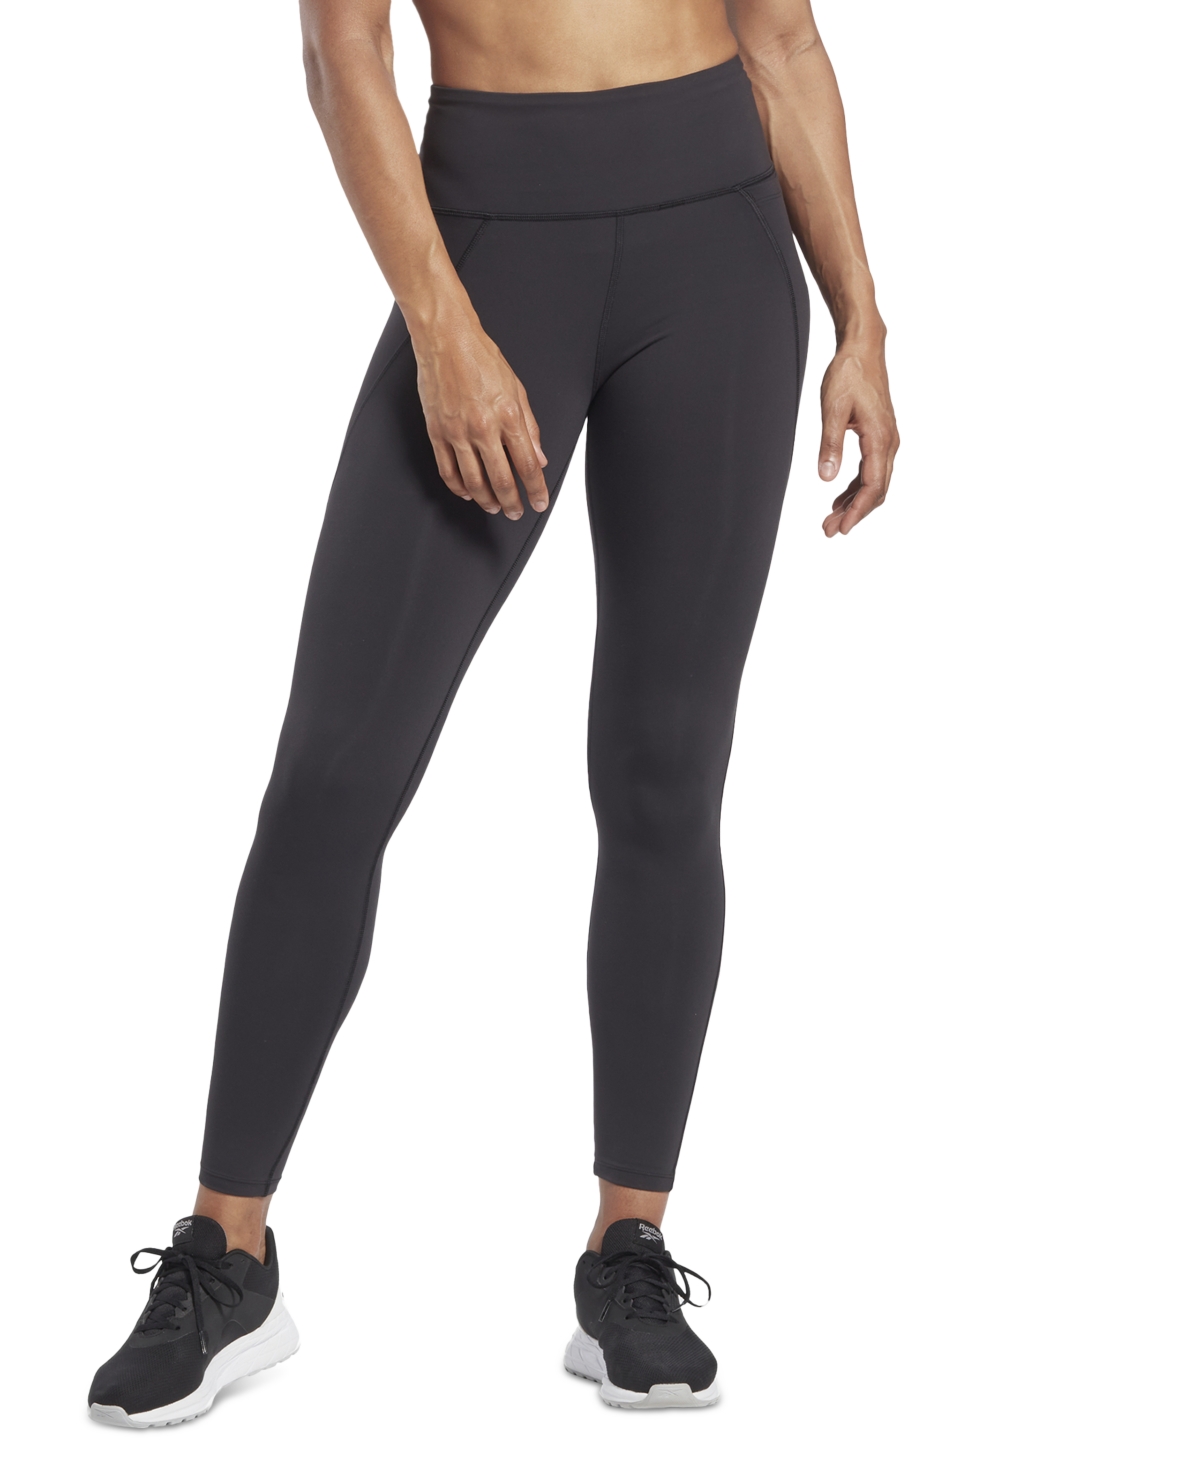 Women's Lux High-Waisted Pull-On Leggings, A Macy's Exclusive - Vector Navy